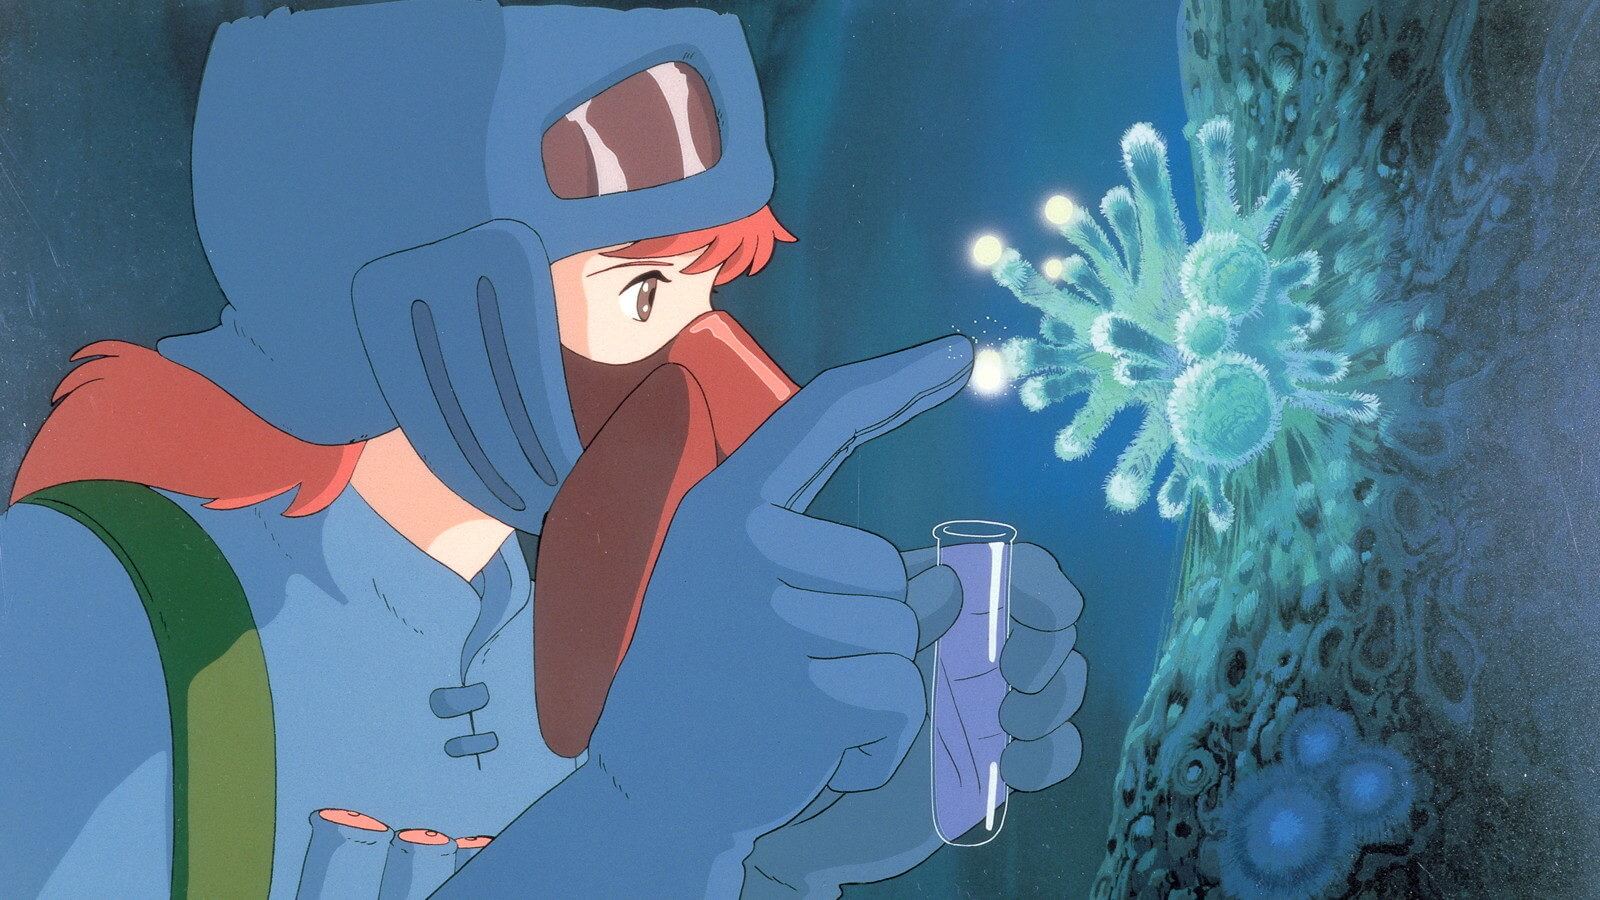 NAUSICAÄ OF THE VALLEY OF THE WIND